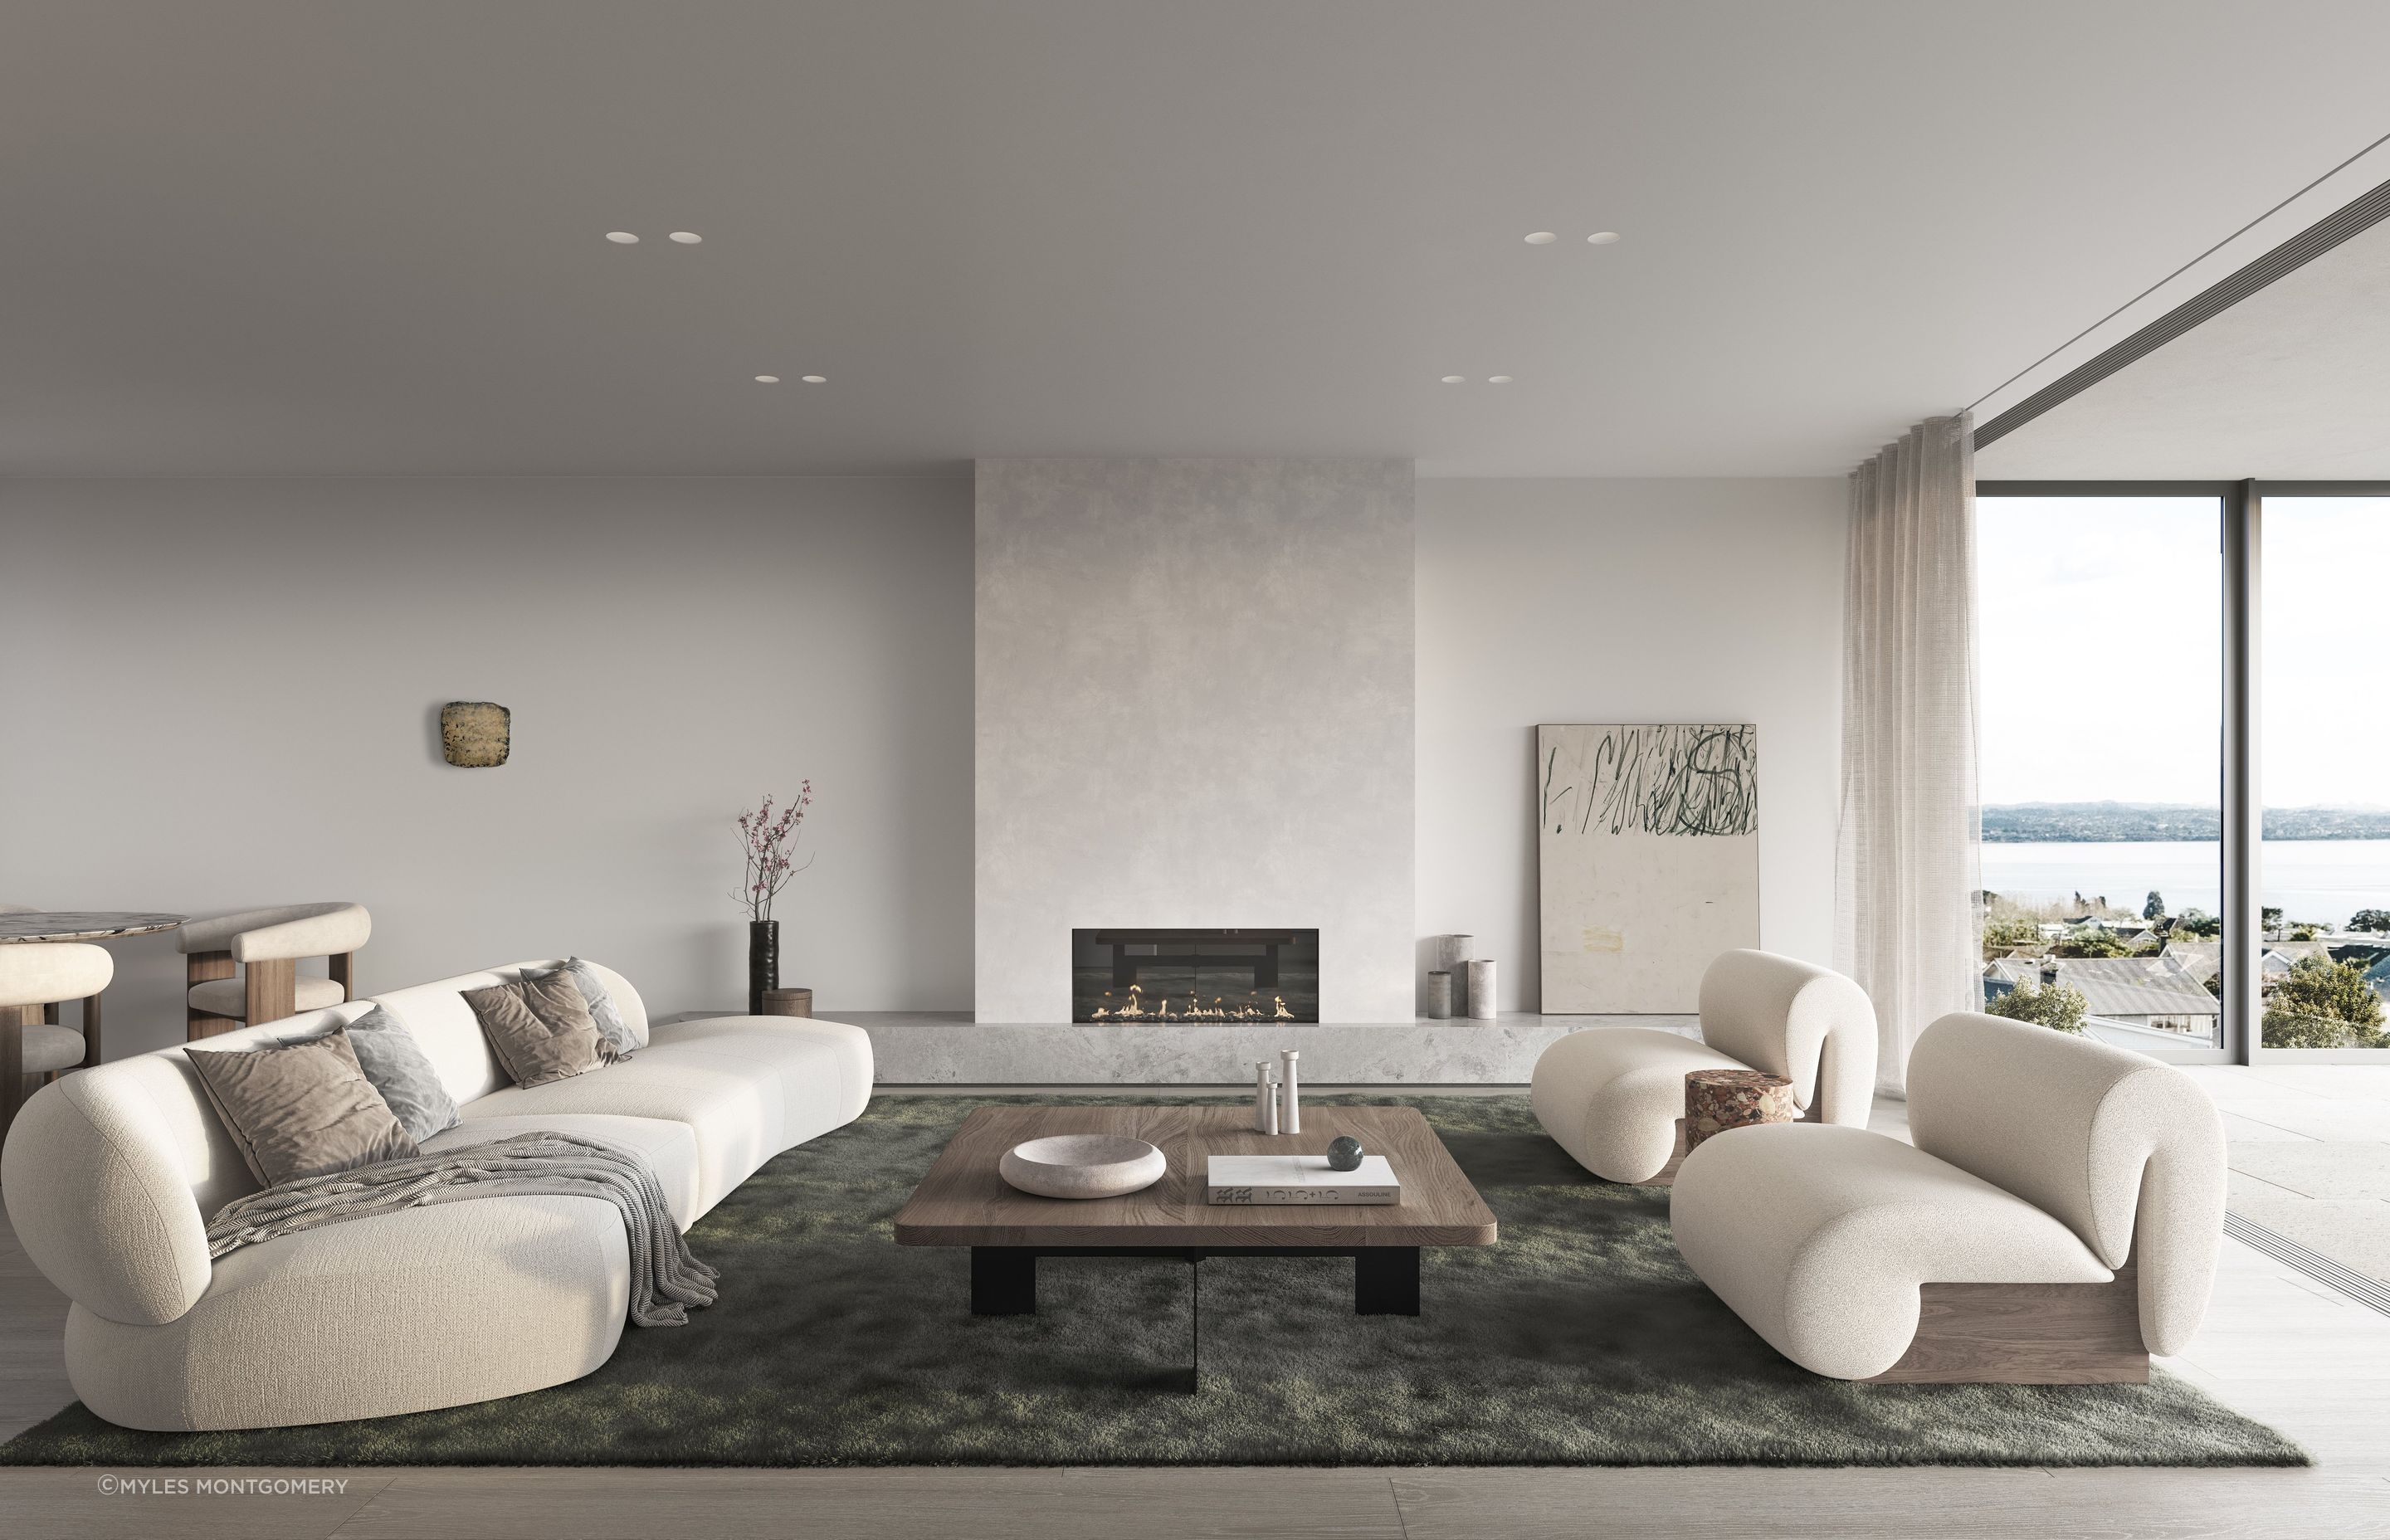 The interiors incorporate natural textures and luxurious materials in muted and refined tones.